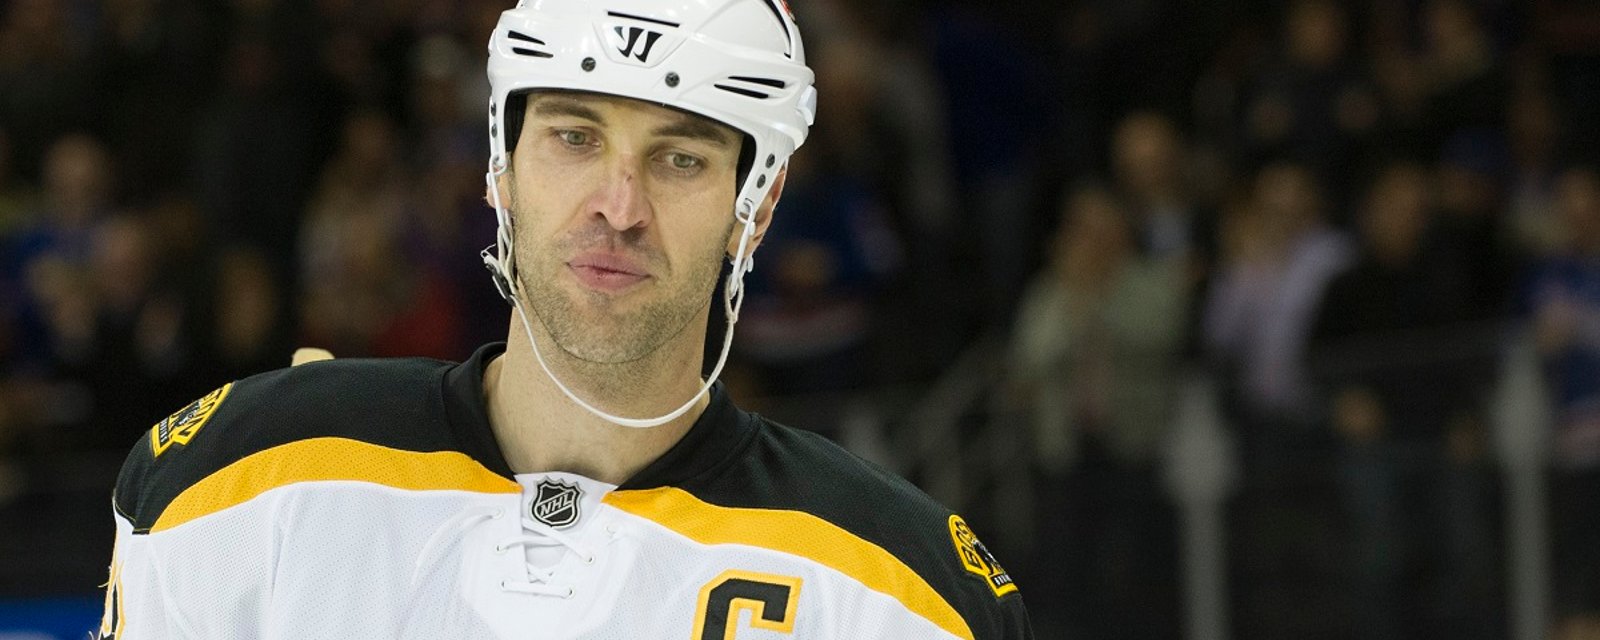 Zdeno Chara comments on his future with the Bruins and in the NHL.